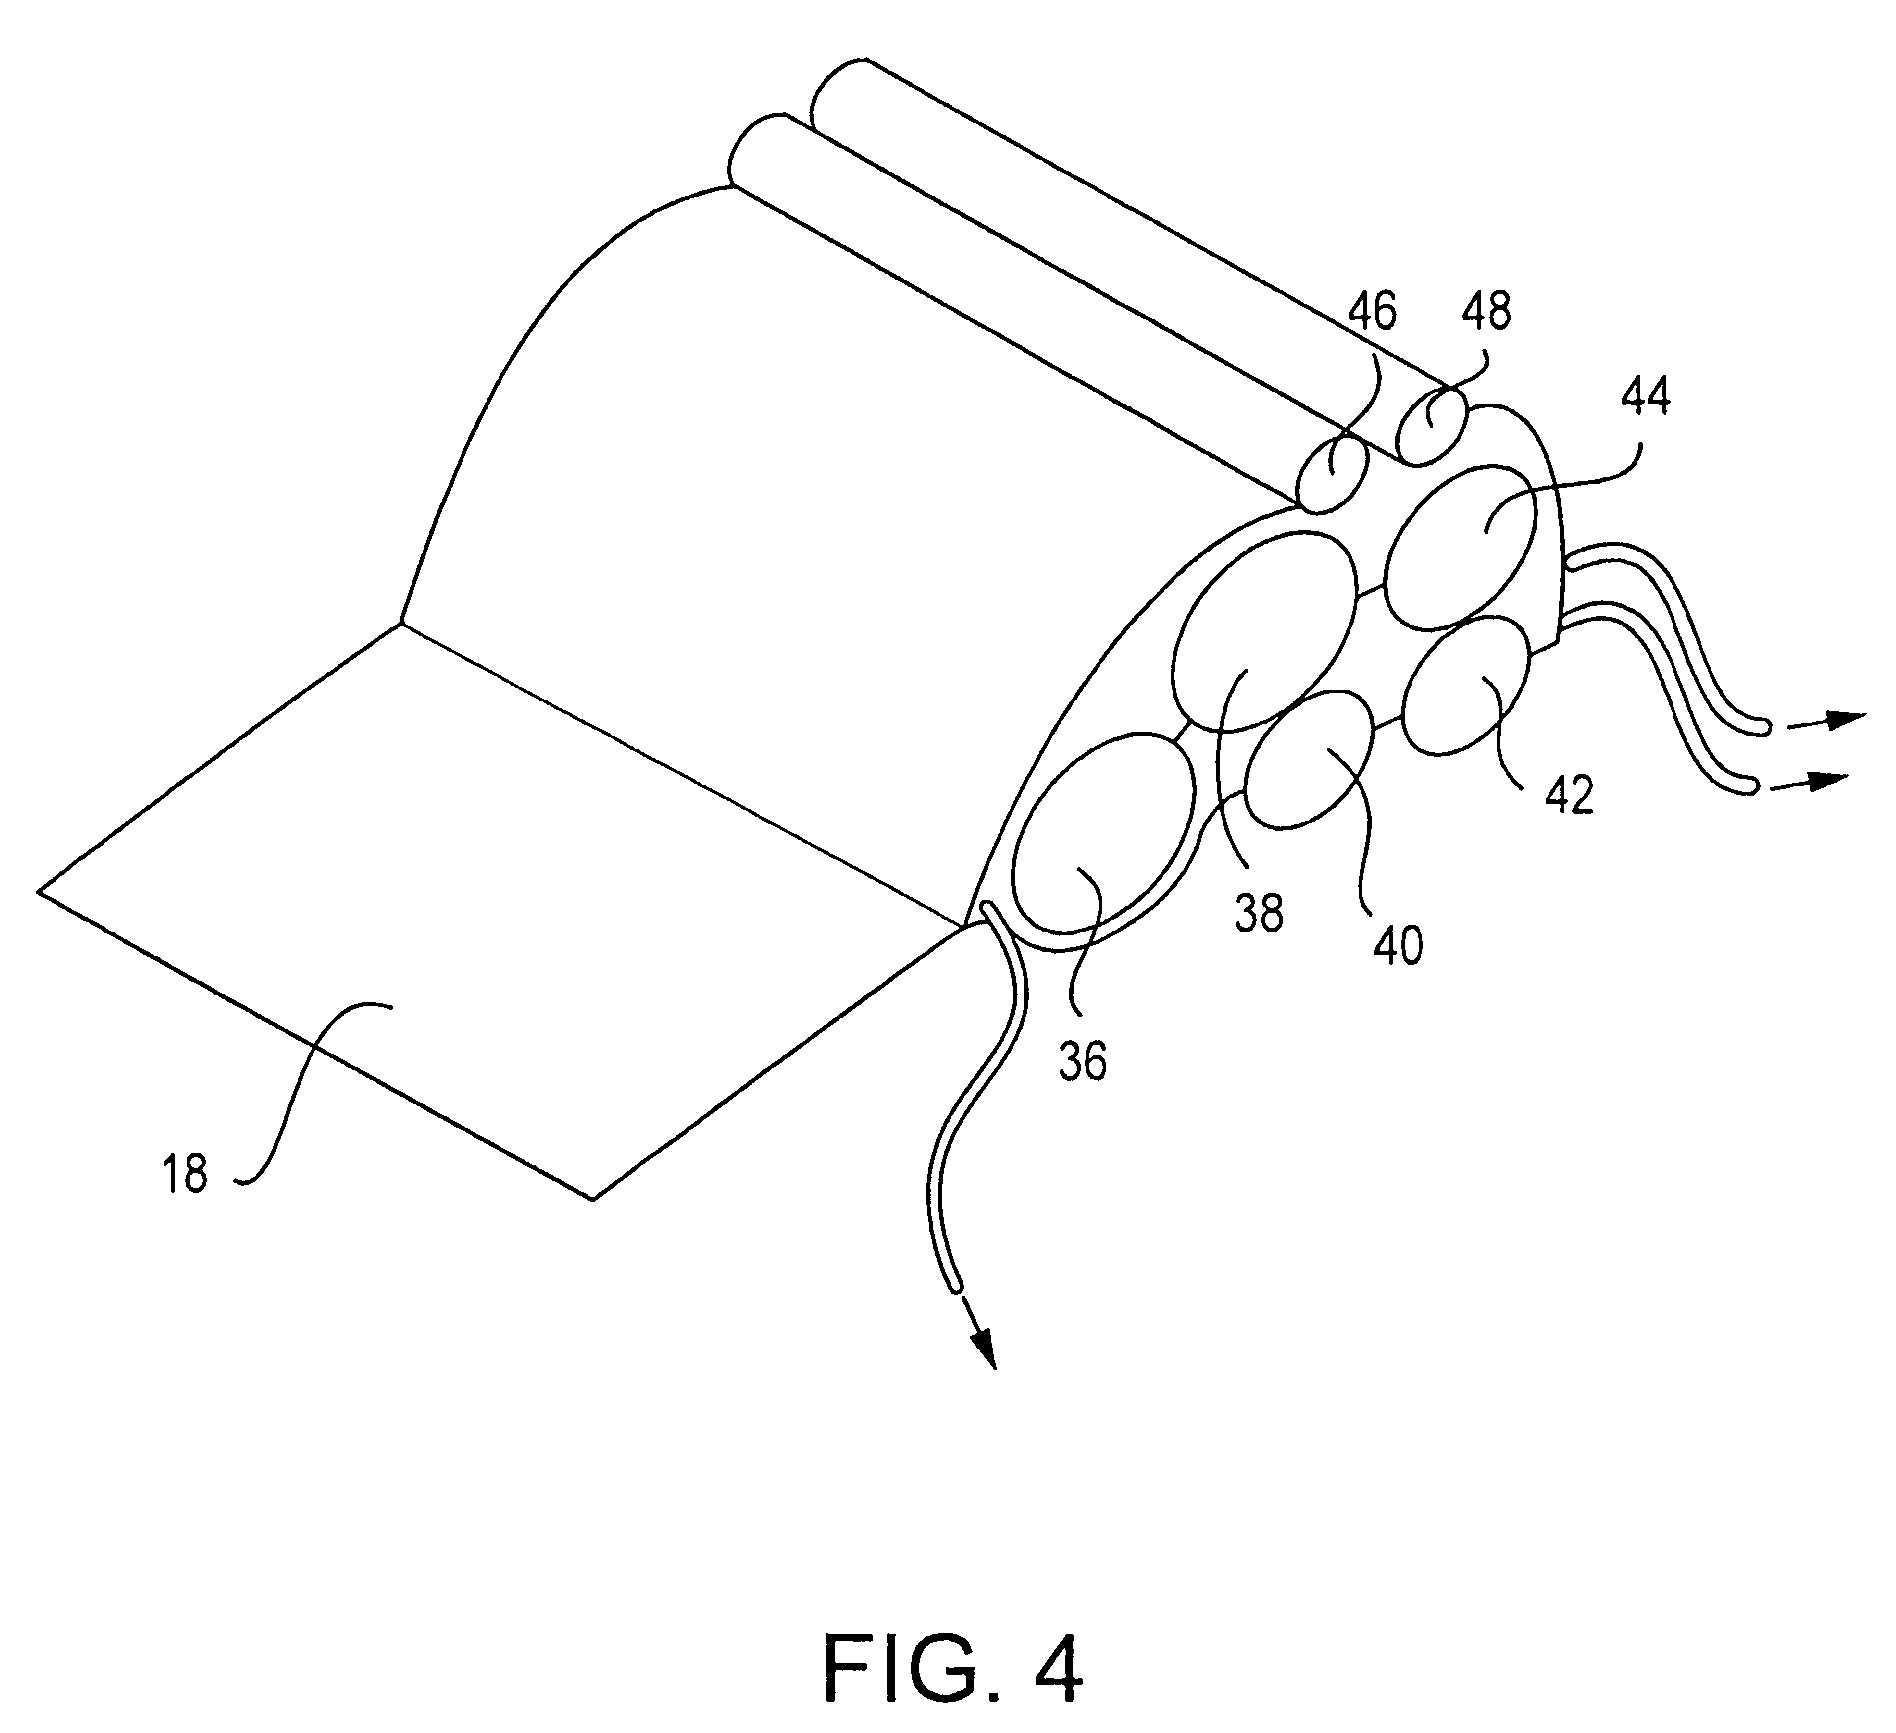 Apparatus and method to position a patient for airway management and endotracheal intubation